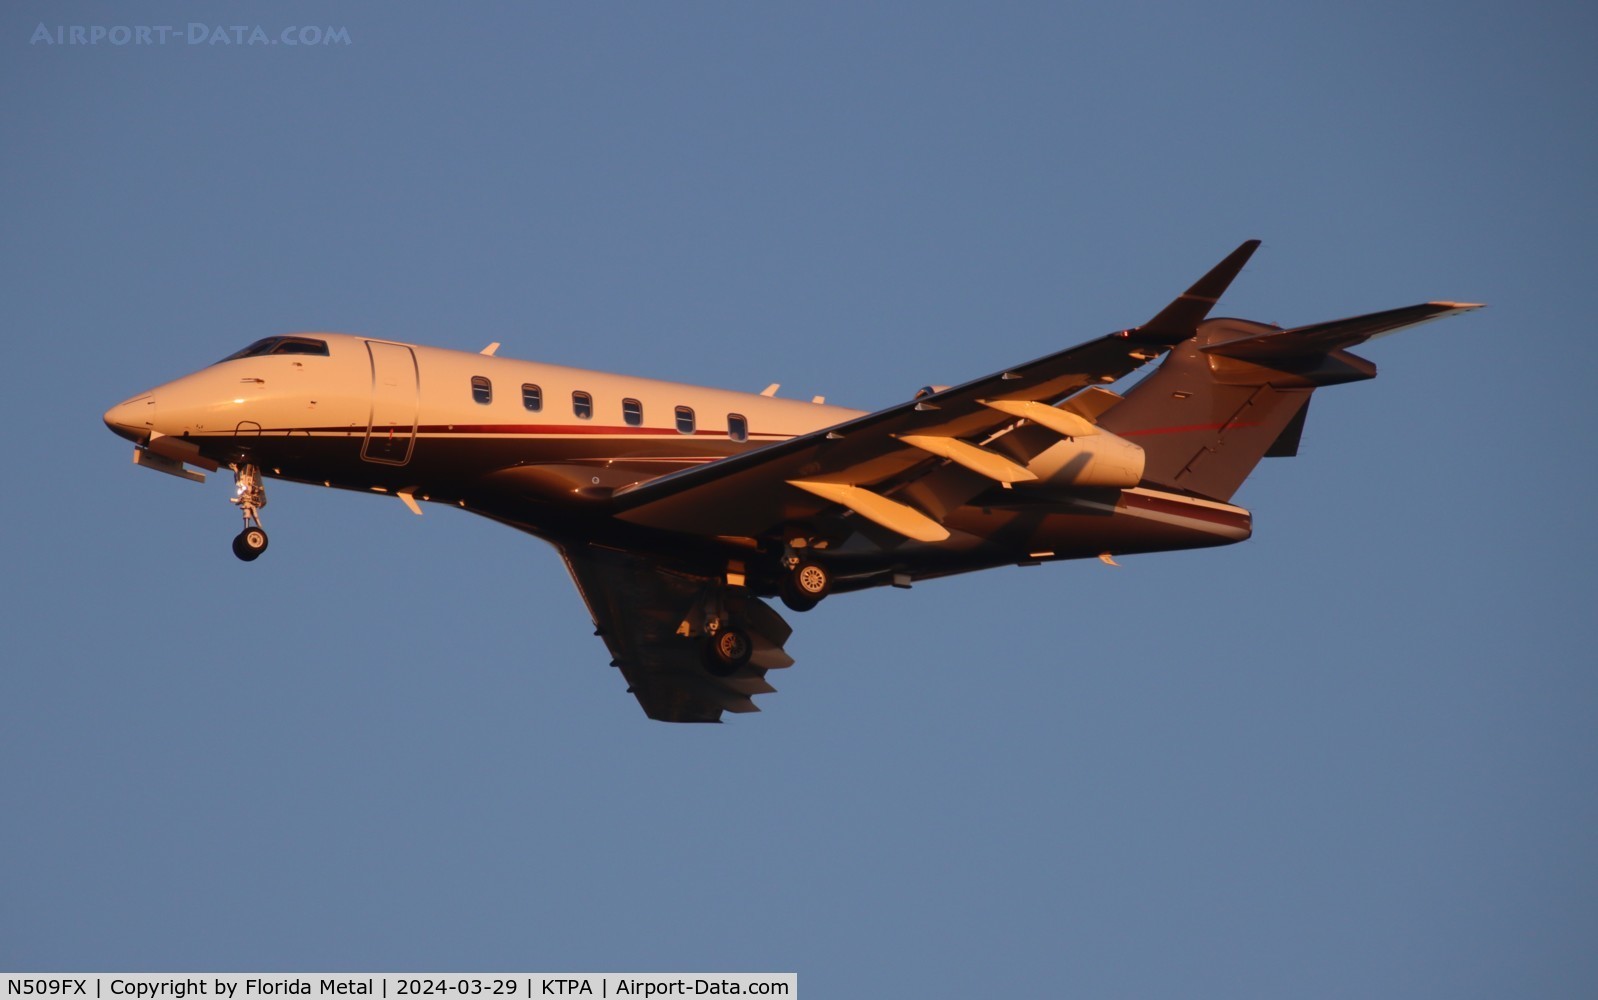 N509FX, 2023 Bombardier Challenger 350 (BD-100-1A10) C/N 20953, Challenger 350 zx PDK-TPA